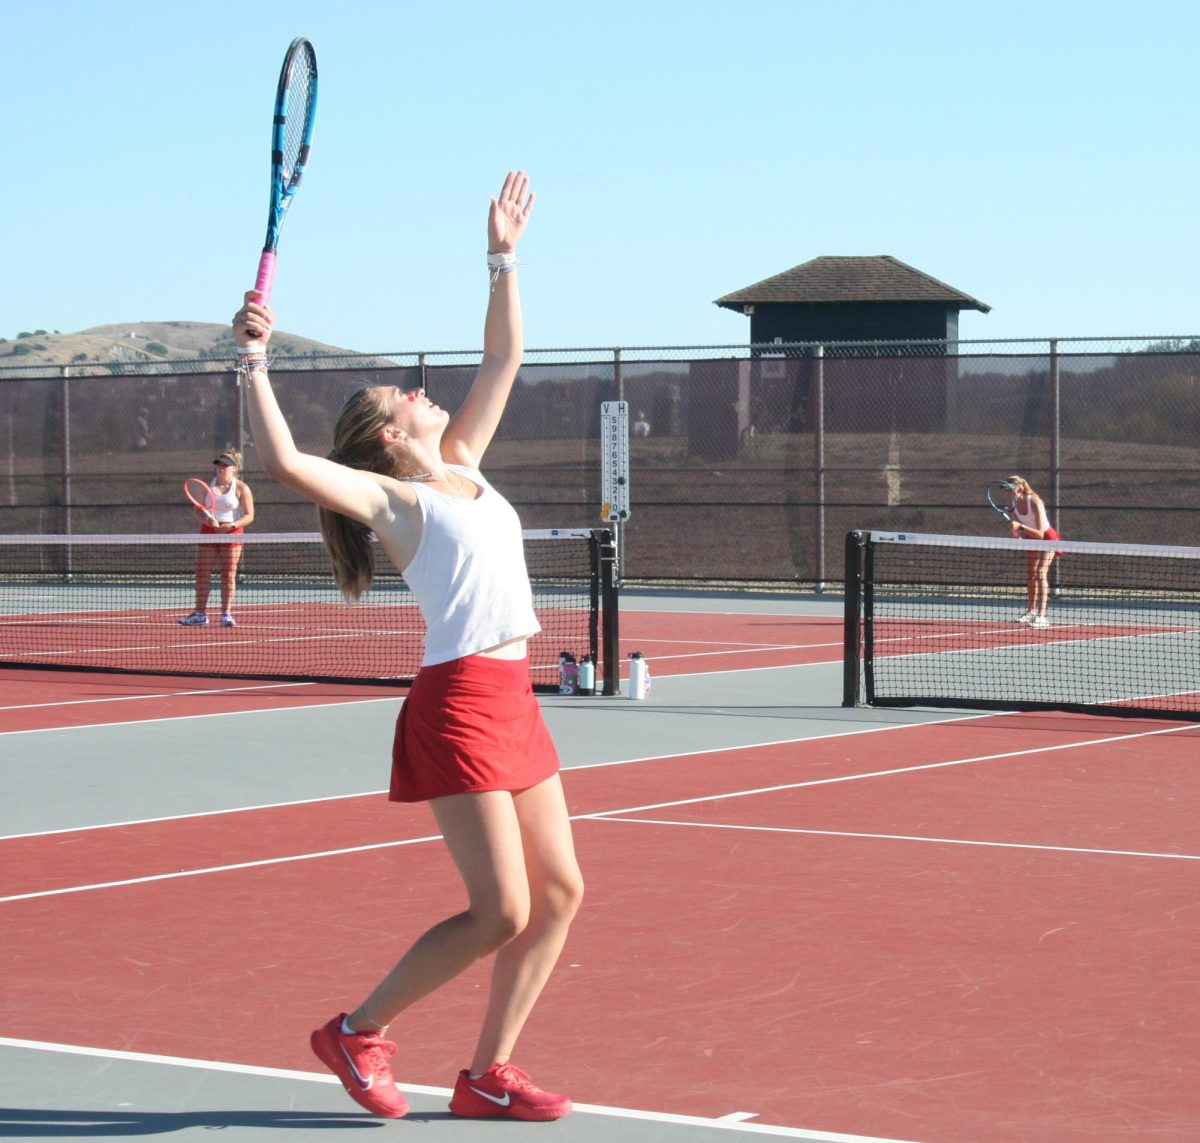 Serving with power, junior Julia Laury gets ready to smash the ball.